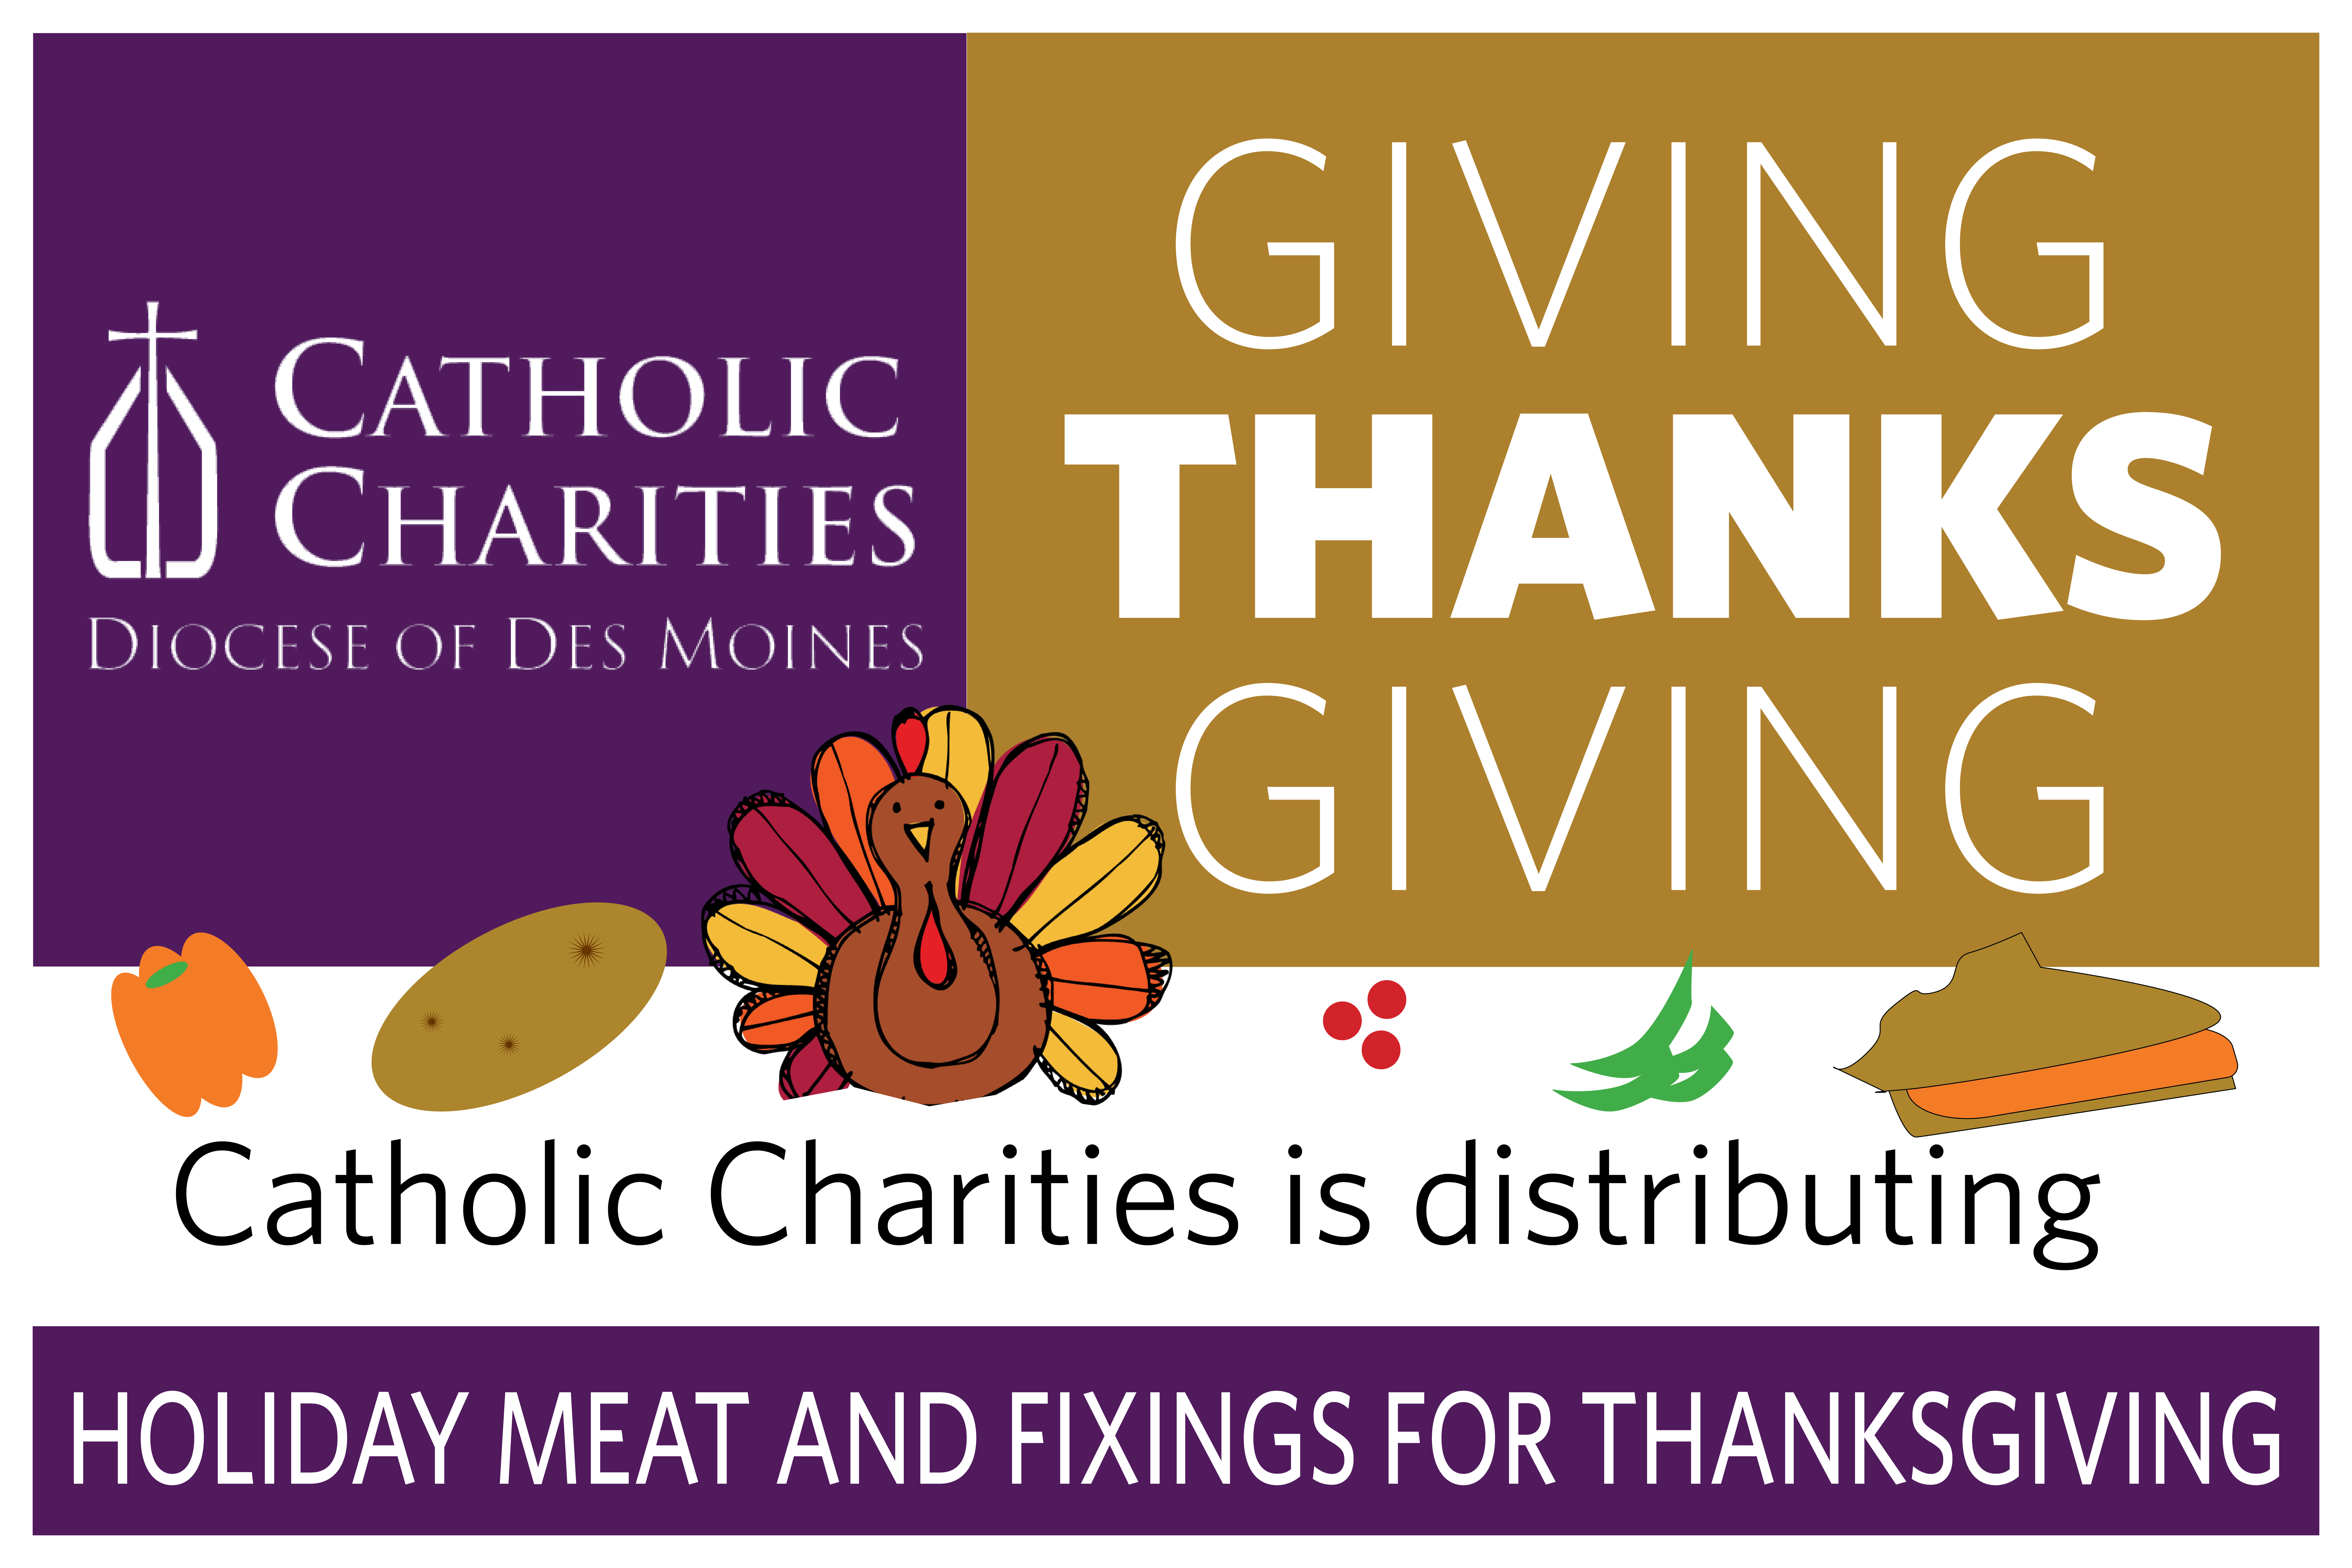 Image with Catholic Charities logo and text "Giving Tha